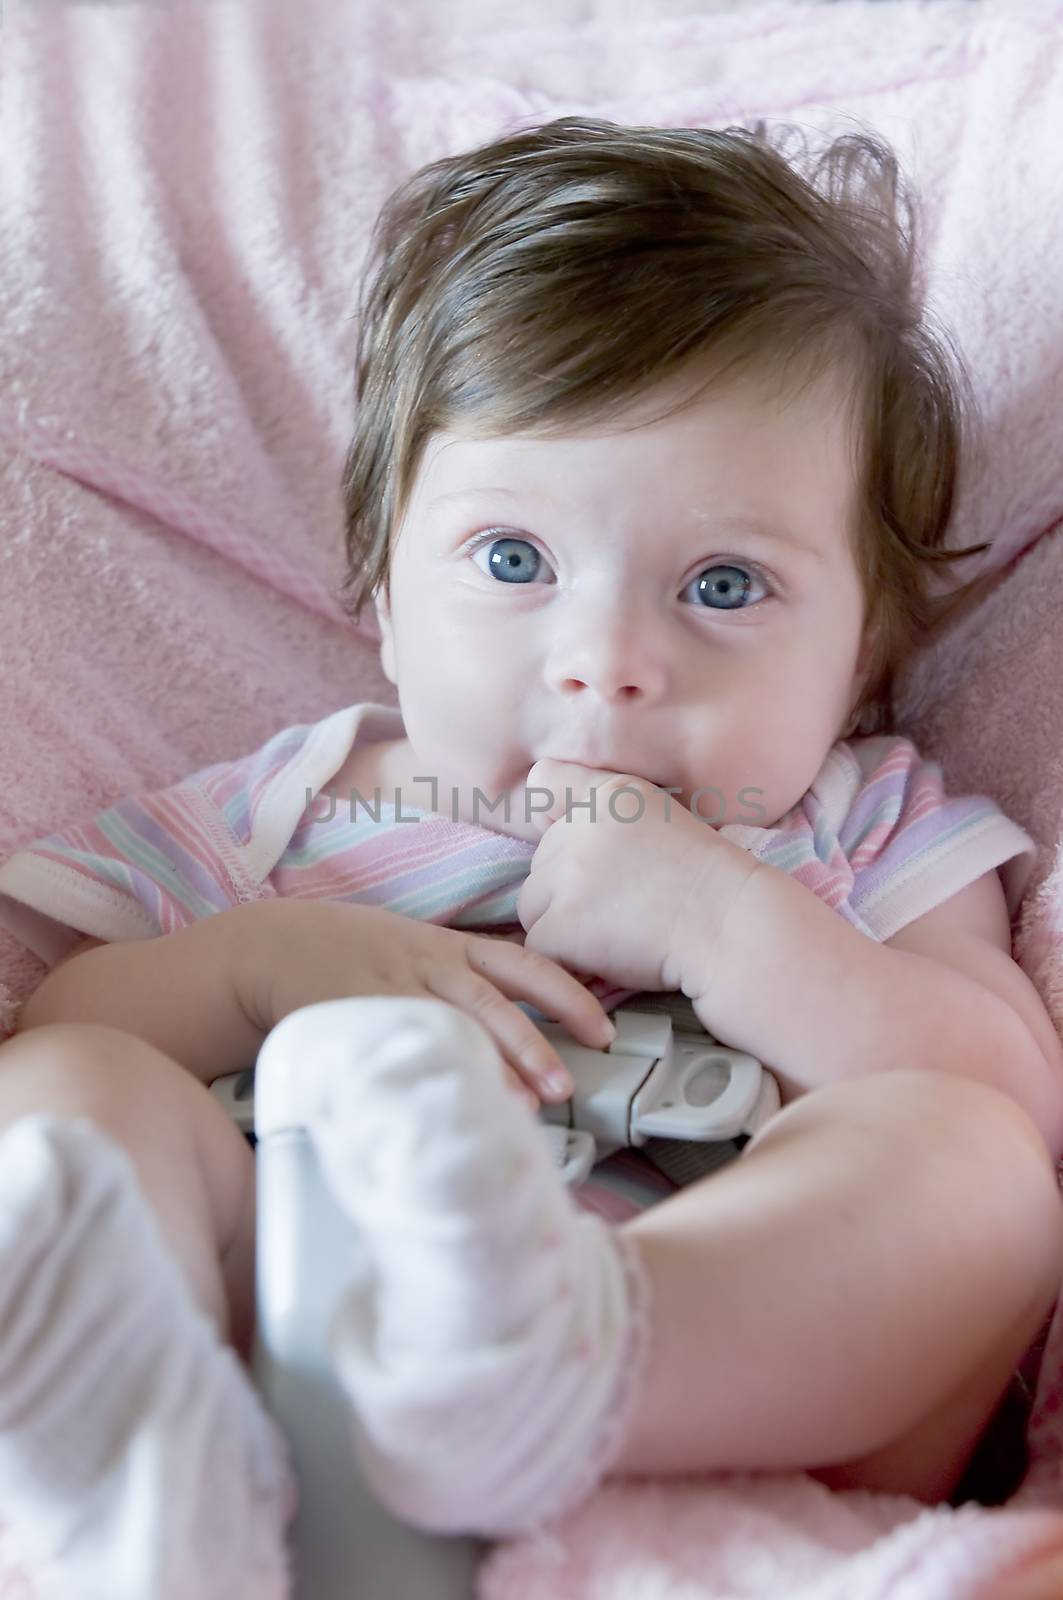 Baby-girl with blue deep eyes